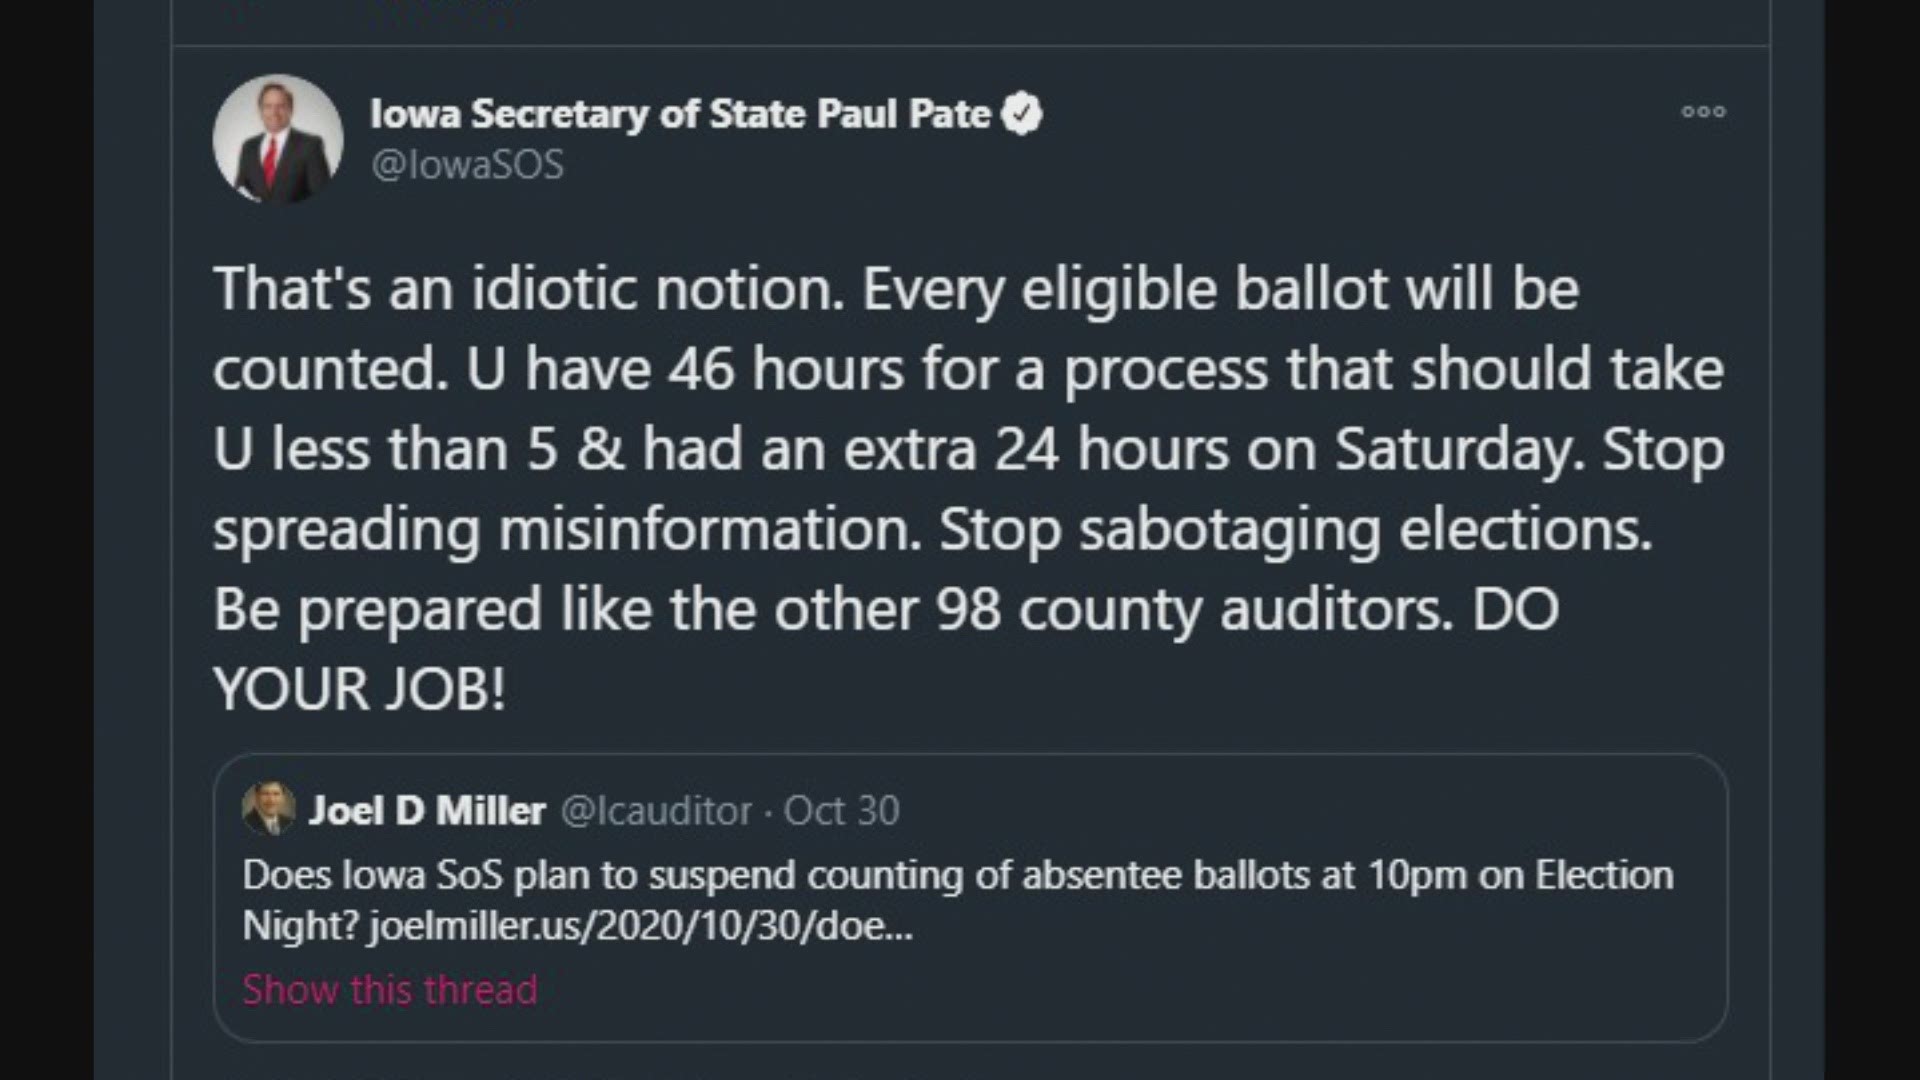 Iowa Secretary of State Paul Pate made it very clear via Twitter that all eligible ballots will continue to be counted if received after Nov. 3.